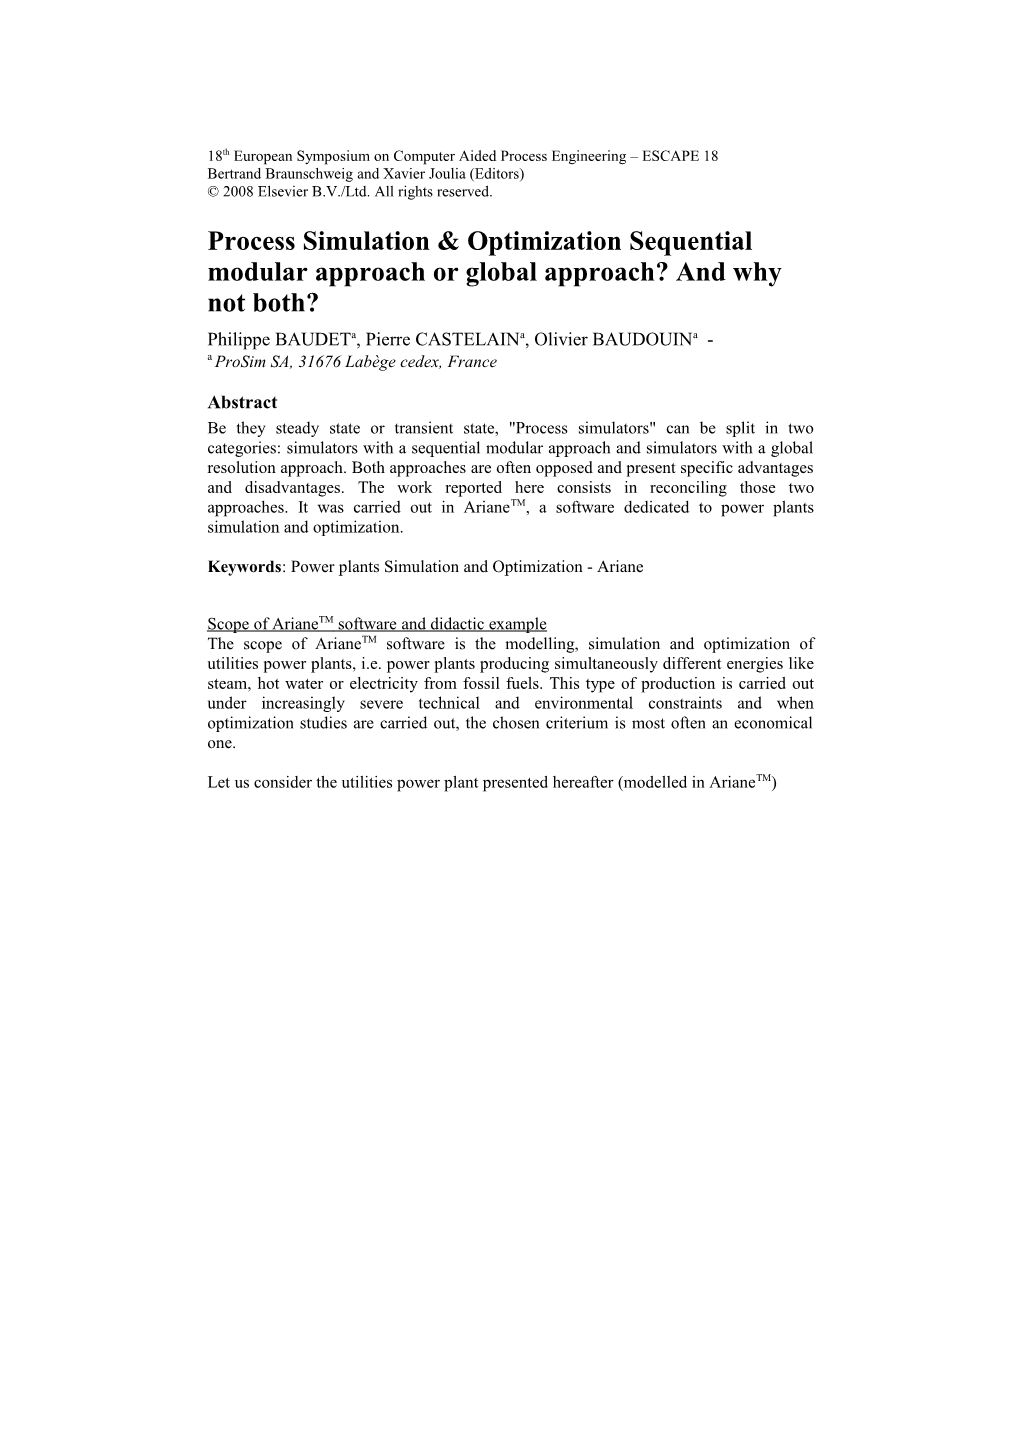 Process Simulation & Optimizationsequential Modular Approach Or Global Approach? and Why